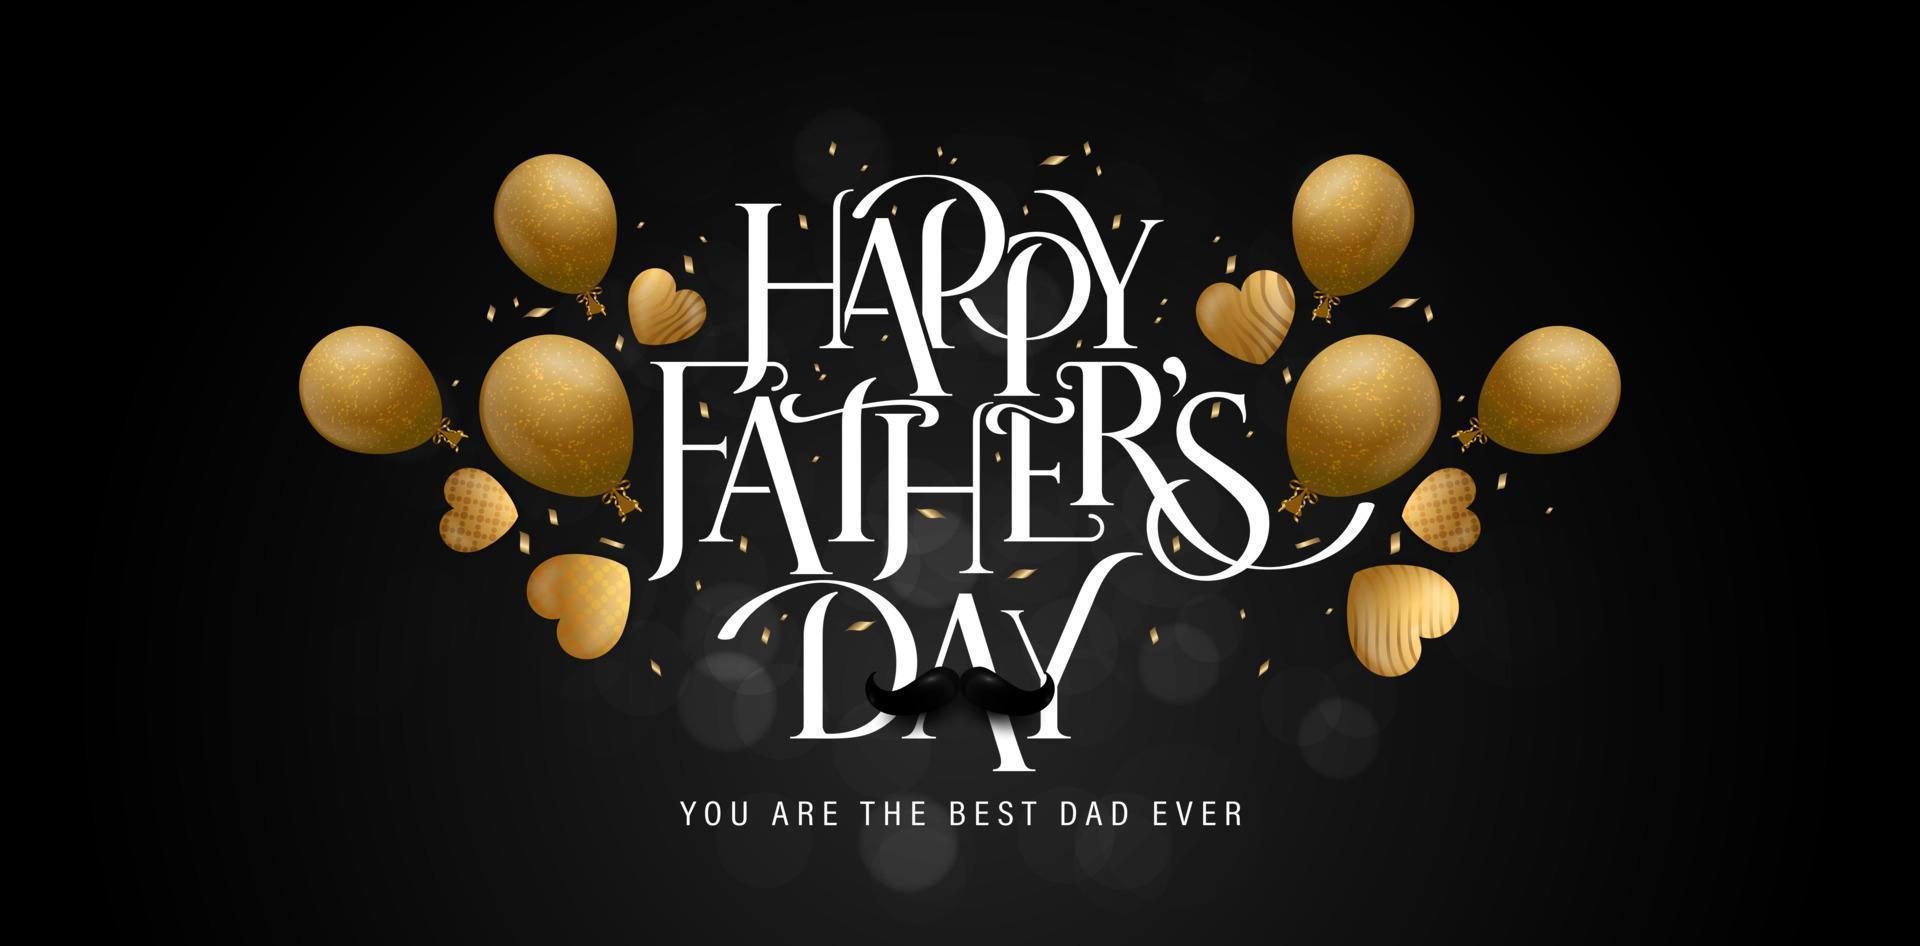 illustration of happy fathers day lettering fonts for website header, social media posts, landing page, corporate and business marketing, ads campaign, advertisement, advertising, printing sublimation vector